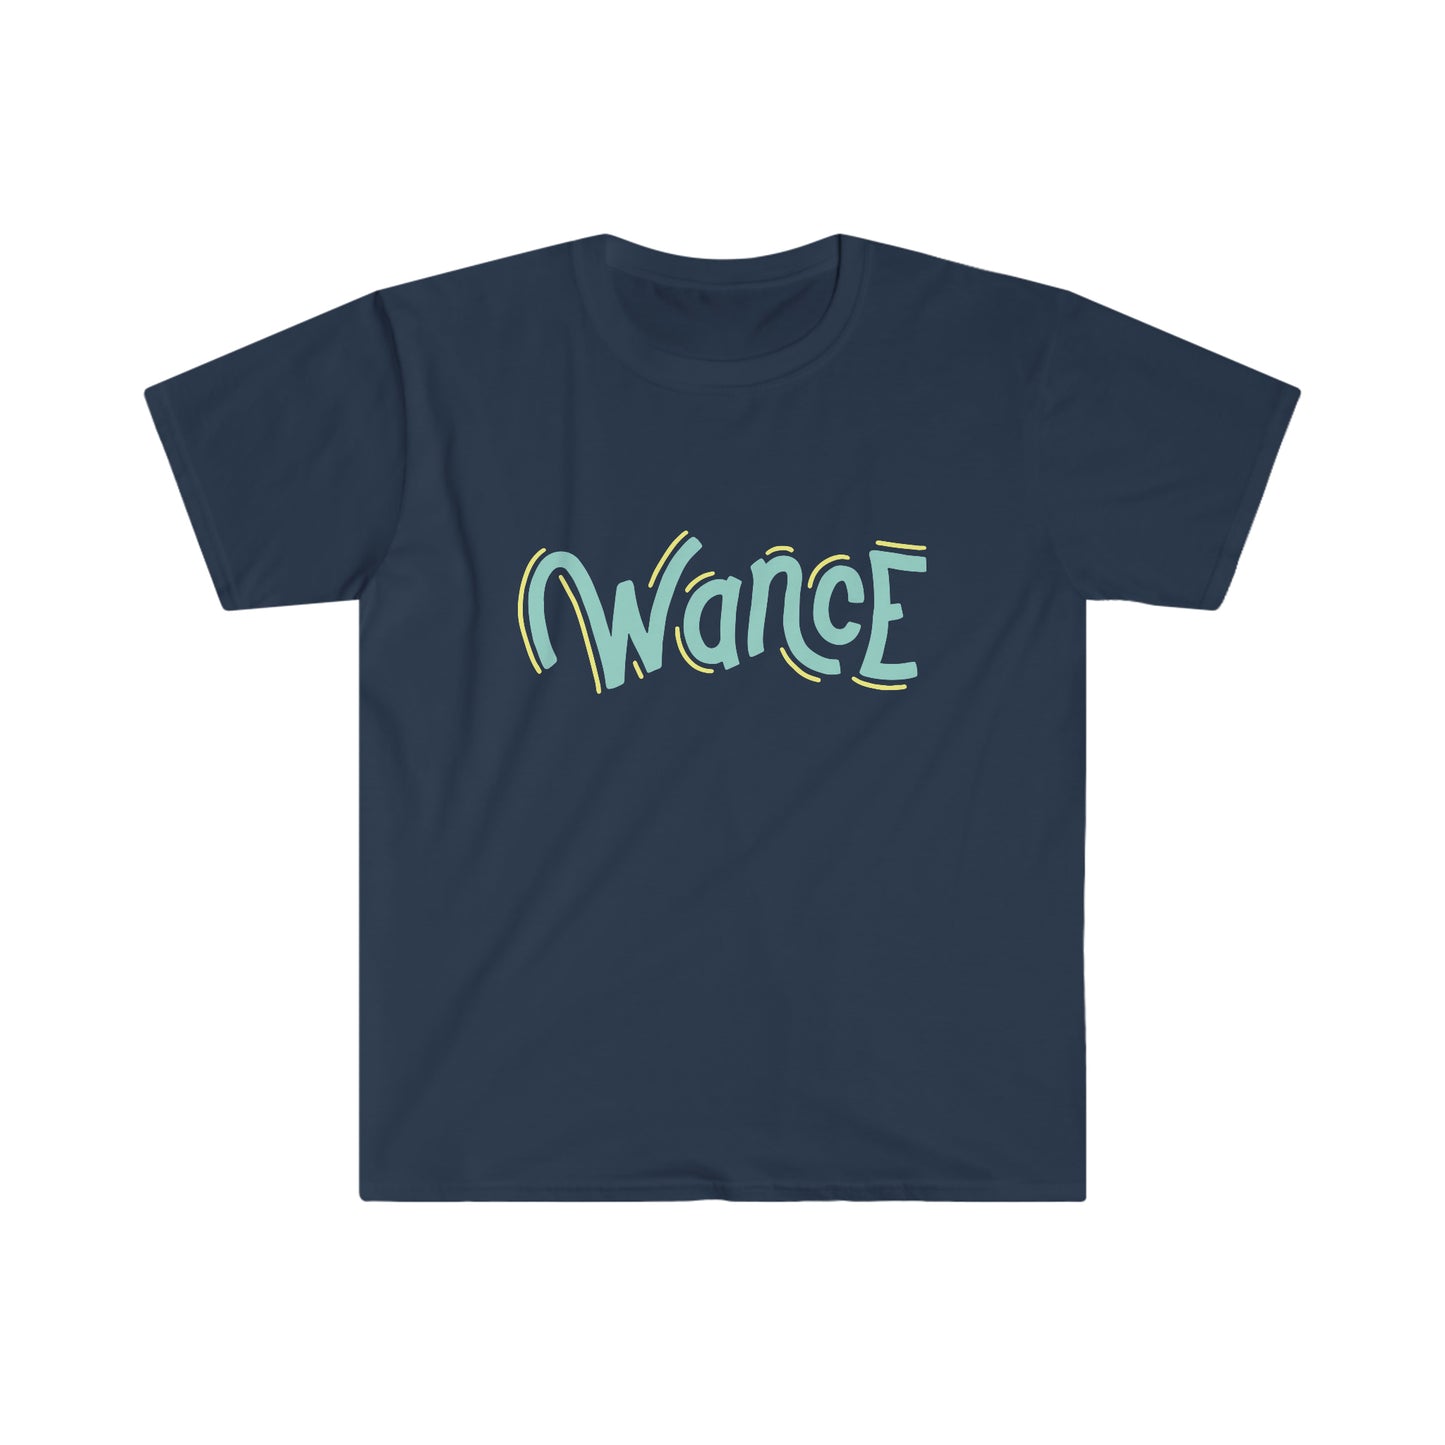 WANCE (teal & yellow) Unisex Softstyle T-Shirt